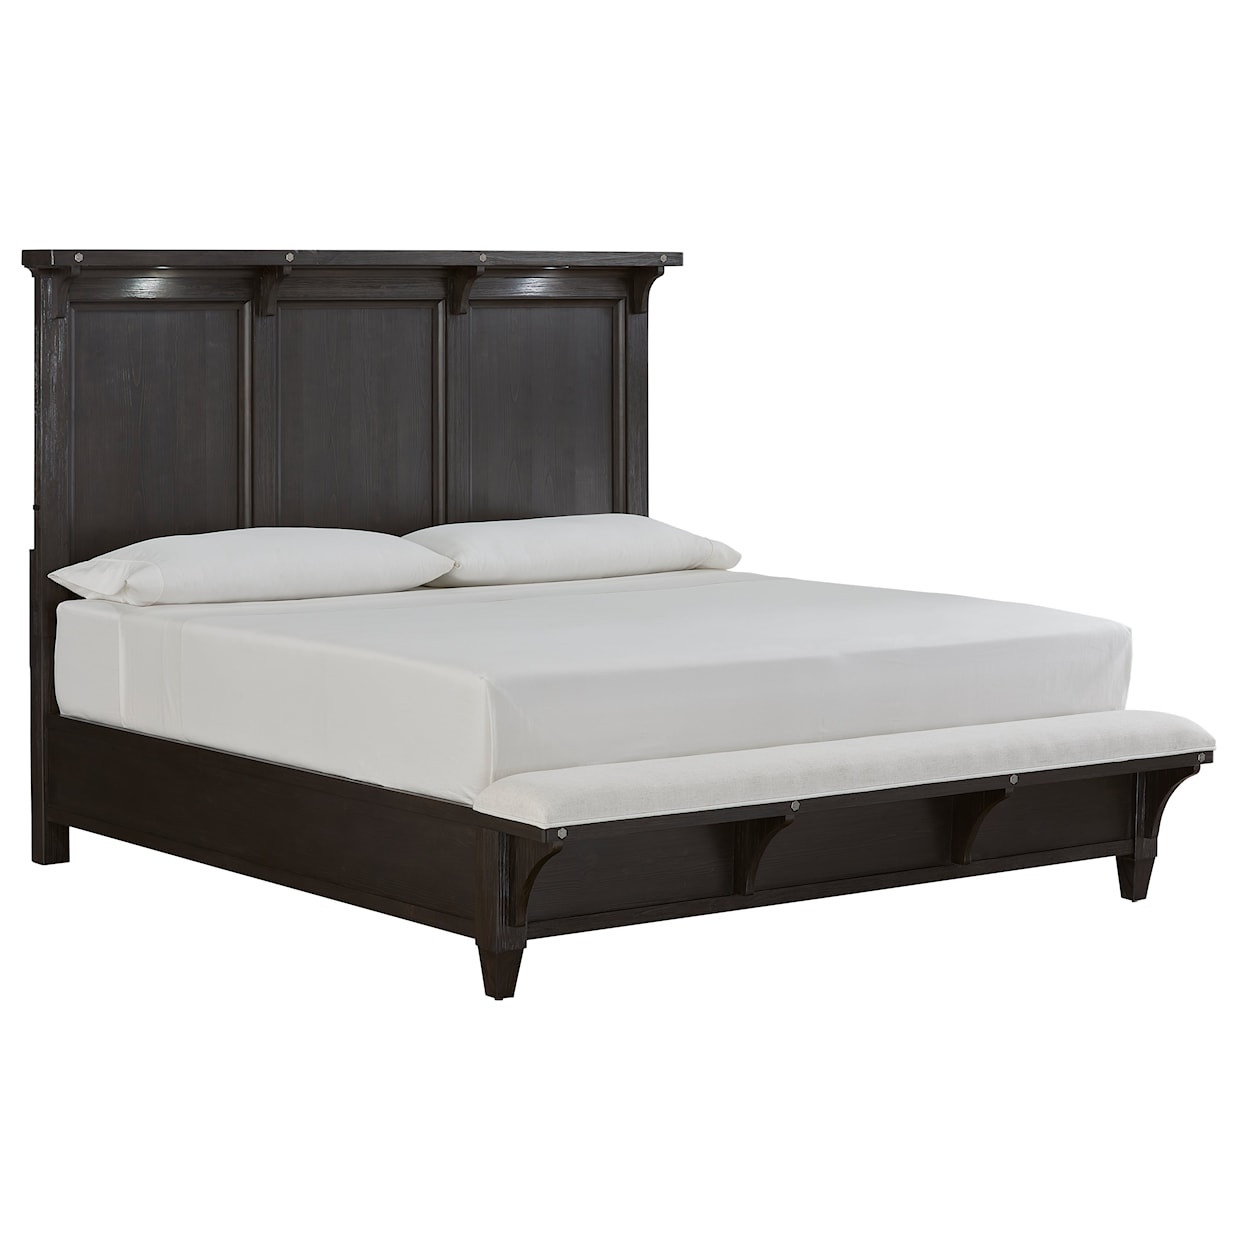 Magnussen Home Sierra Bedroom California King Lighted Panel Bed with Bench